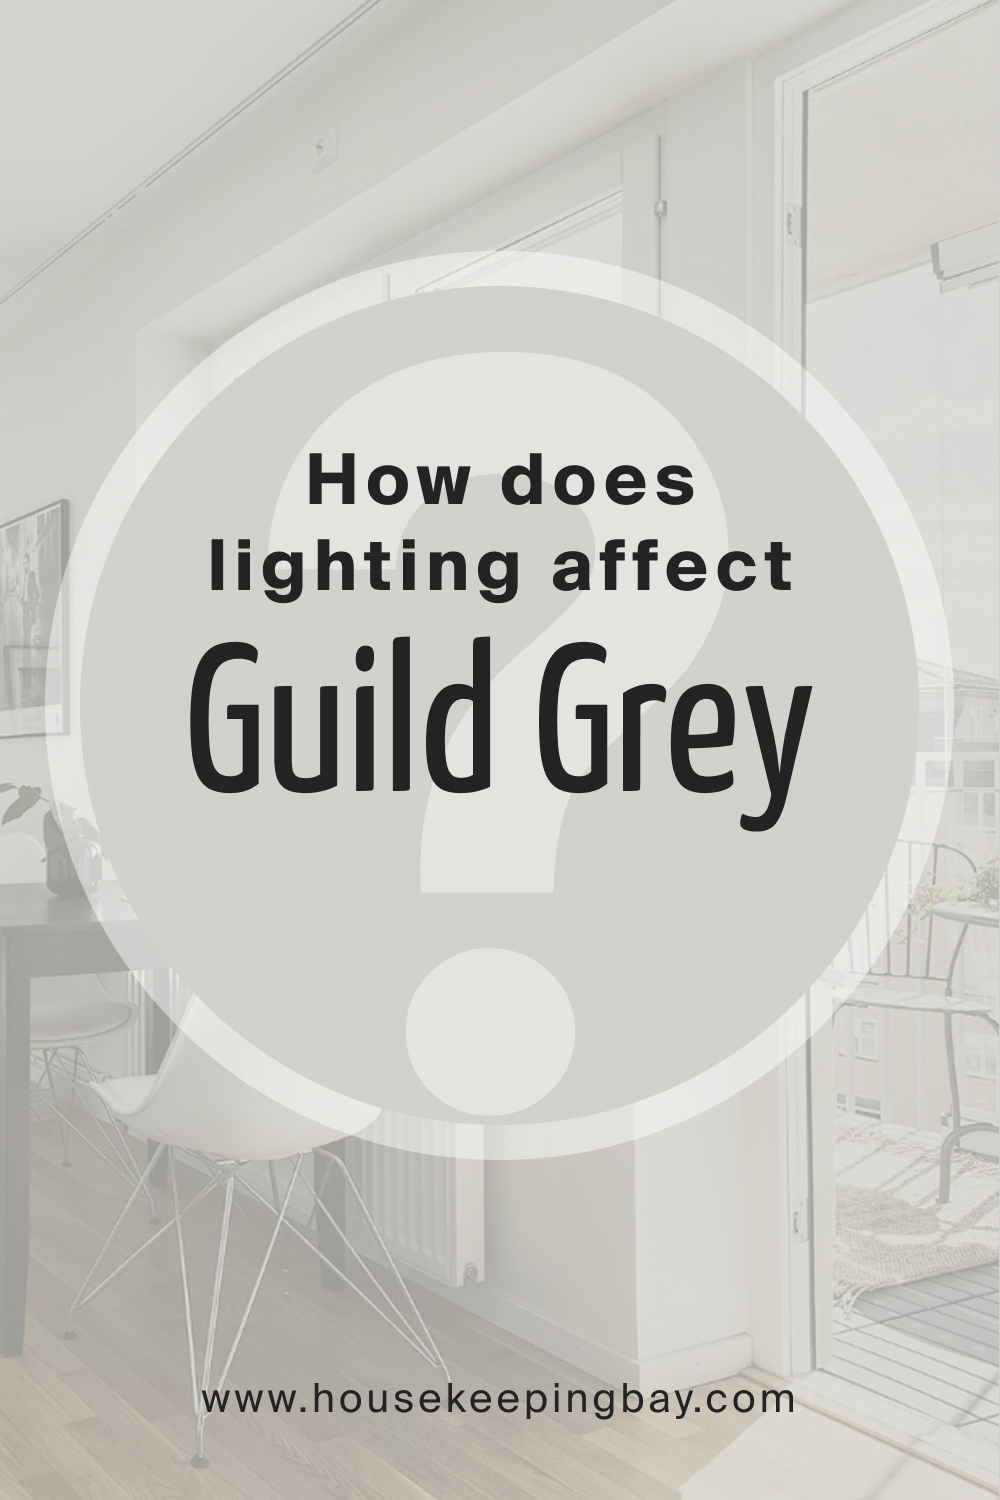 How does lighting affect SW 9561 Guild Grey